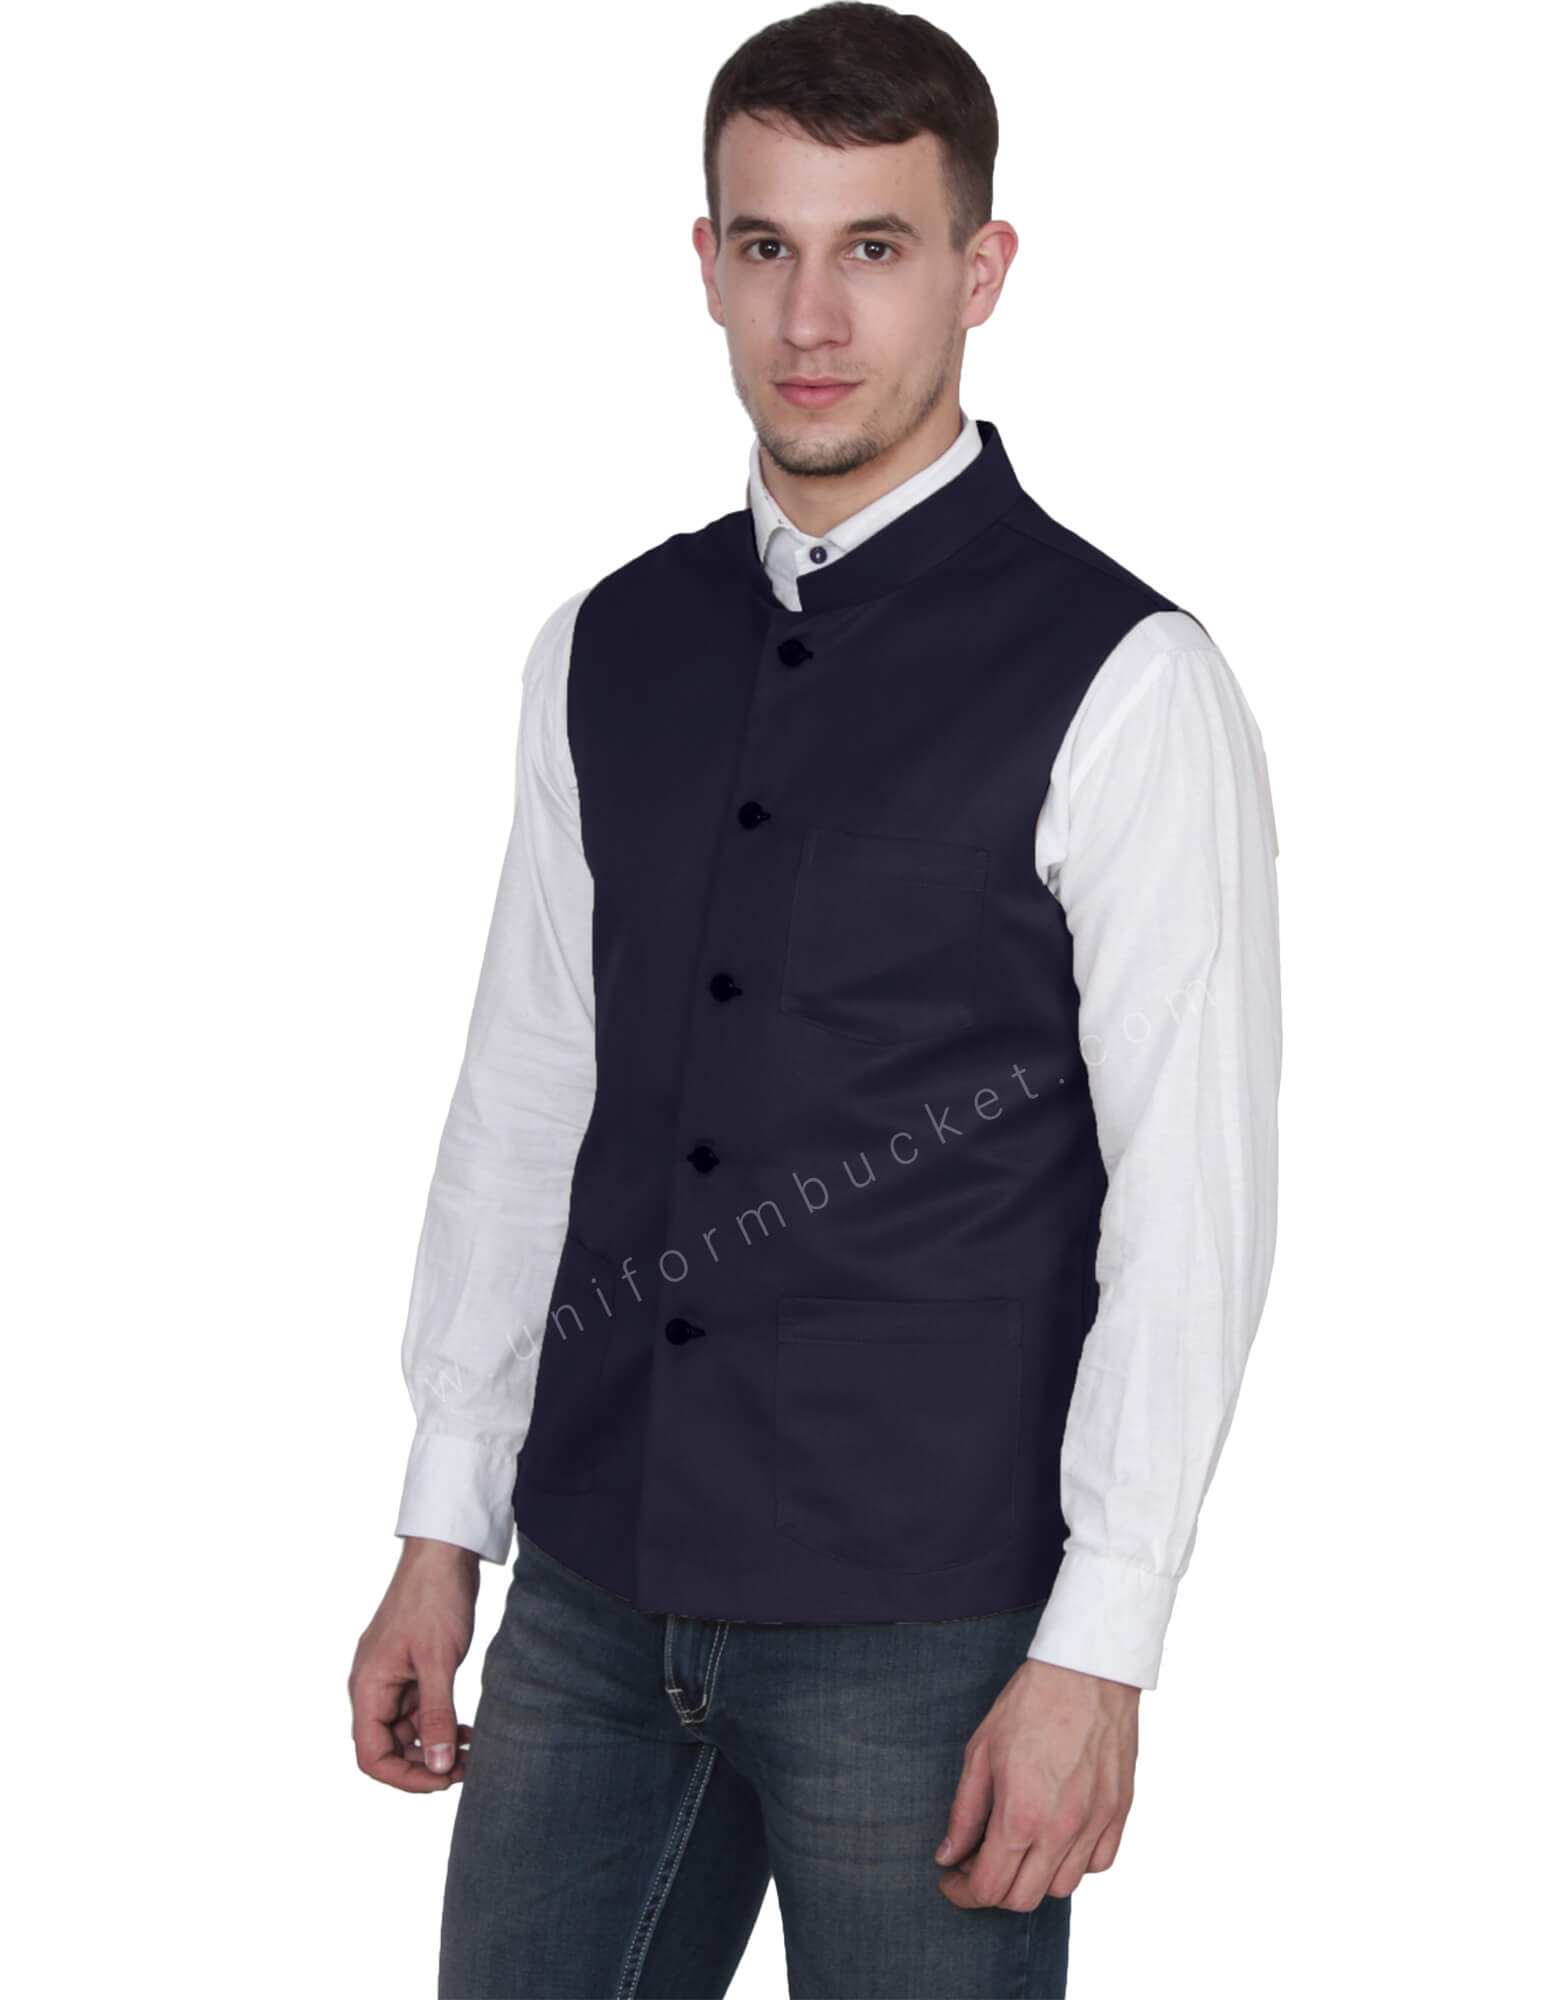 Wintage Mens Poly Cotton Festive and Casual Nehru Jacket Vest Waistcoat   Blue